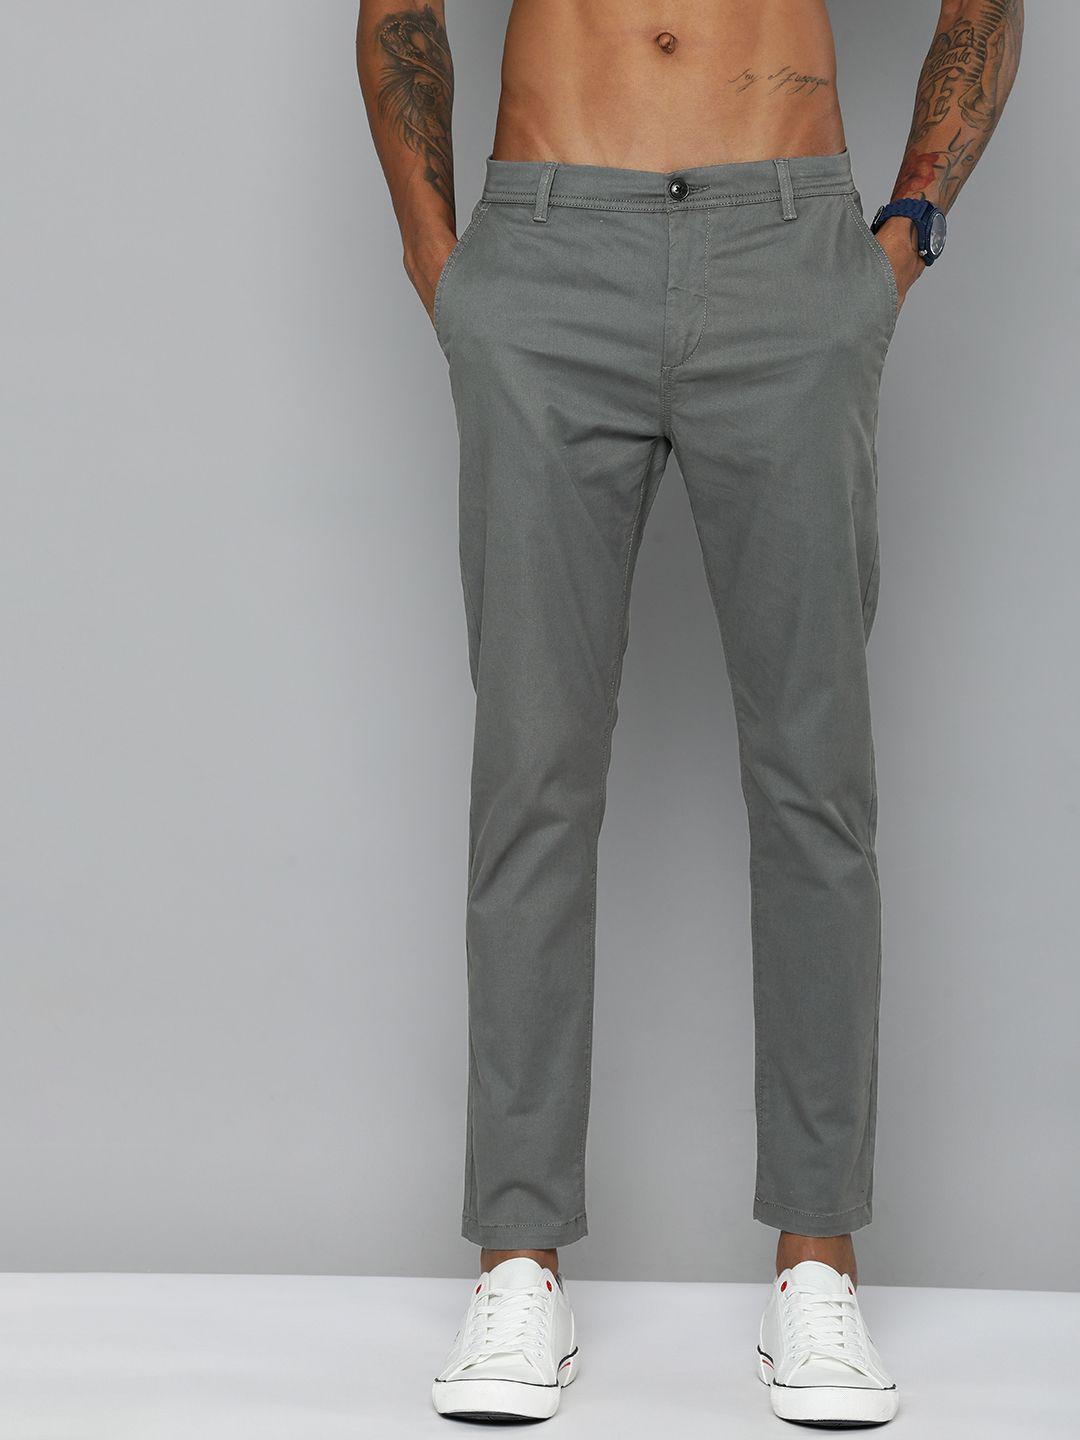 flying-machine-men-tapered-fit-chinos